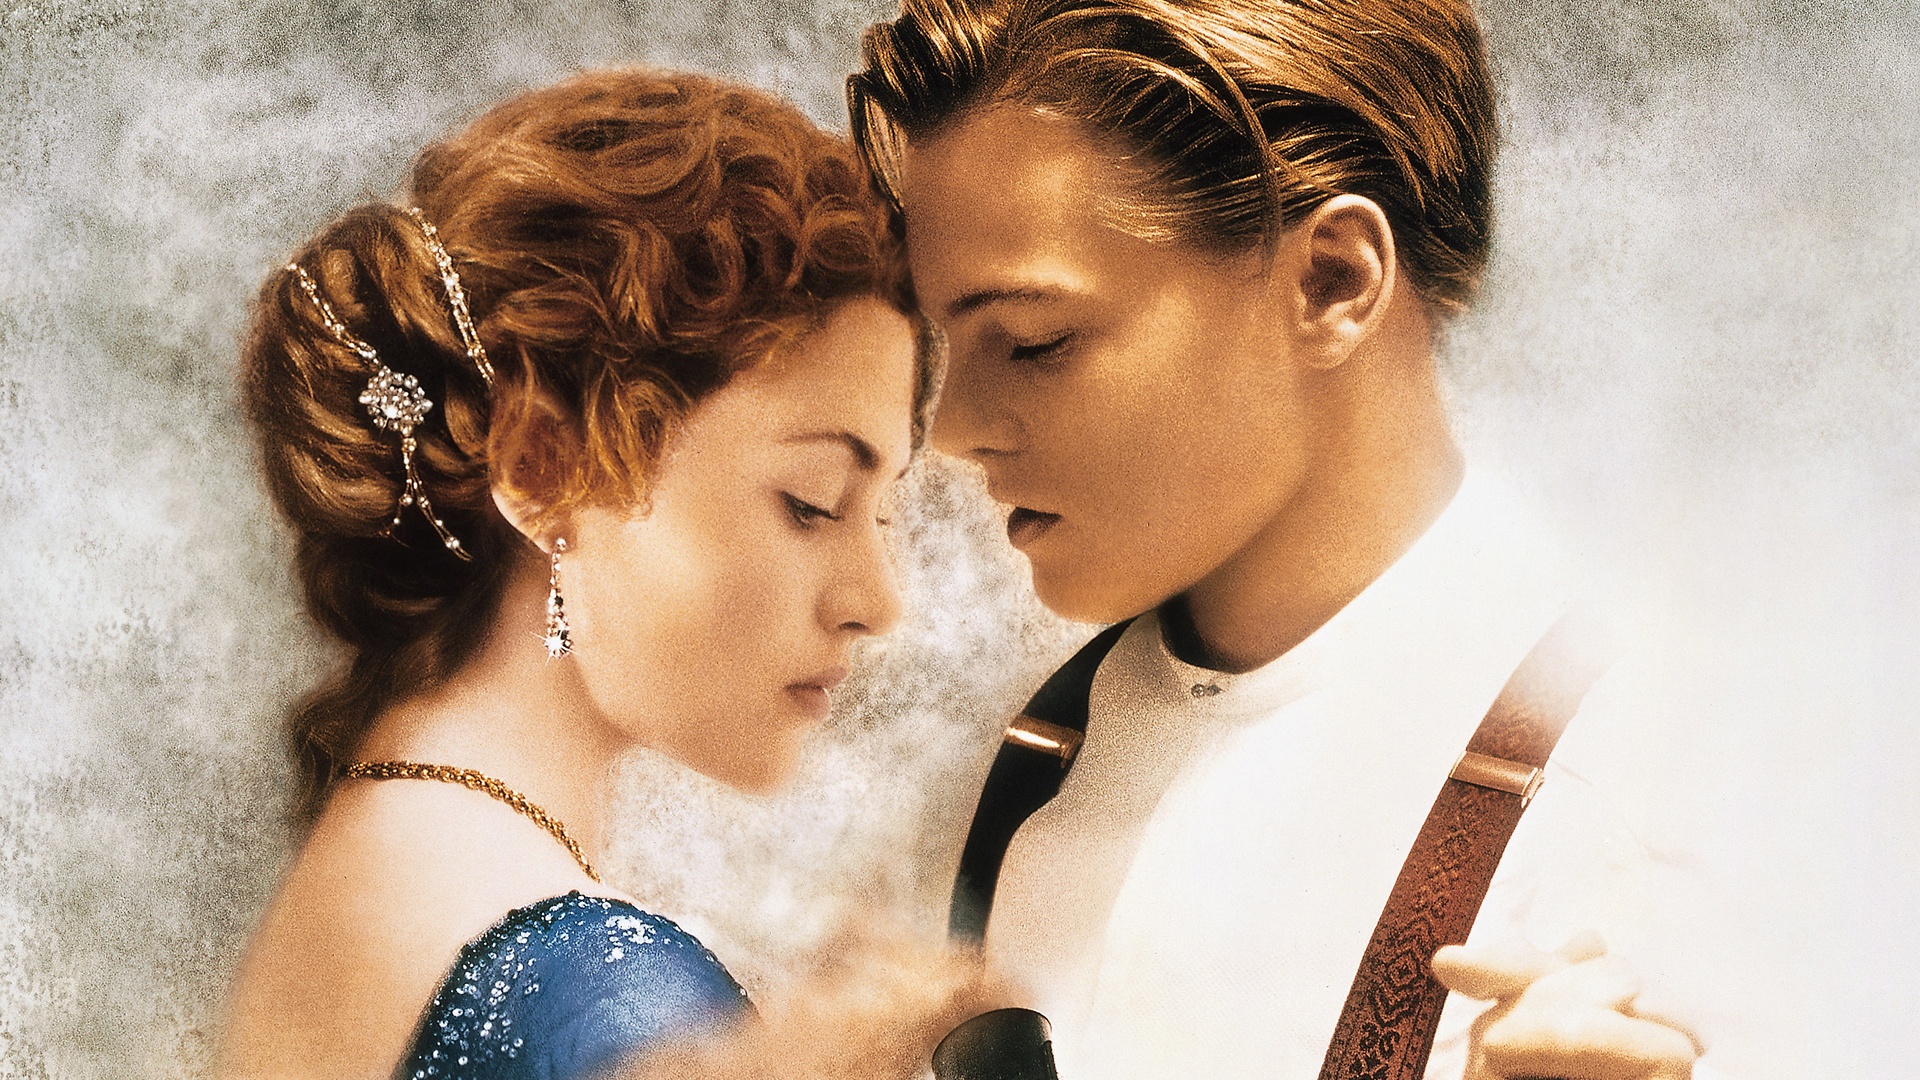 Titanic 1997 Movie Wallpapers, Images, Photos